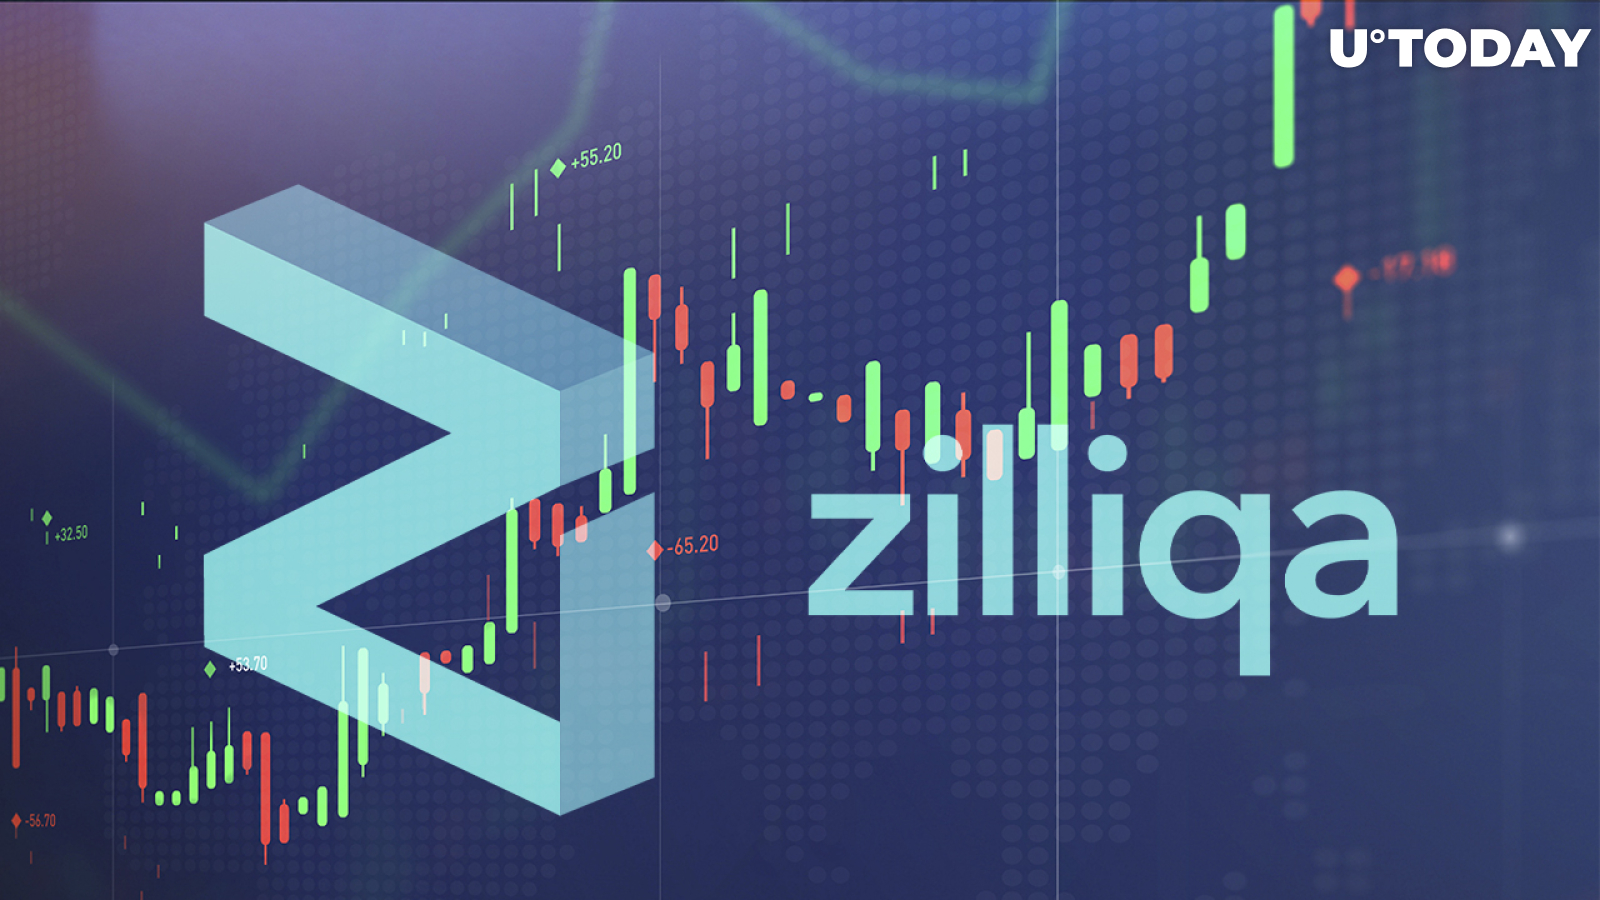 Zilliqa (ZIL) Spiked by 40%, Showing Dominance on Market: Here's Why